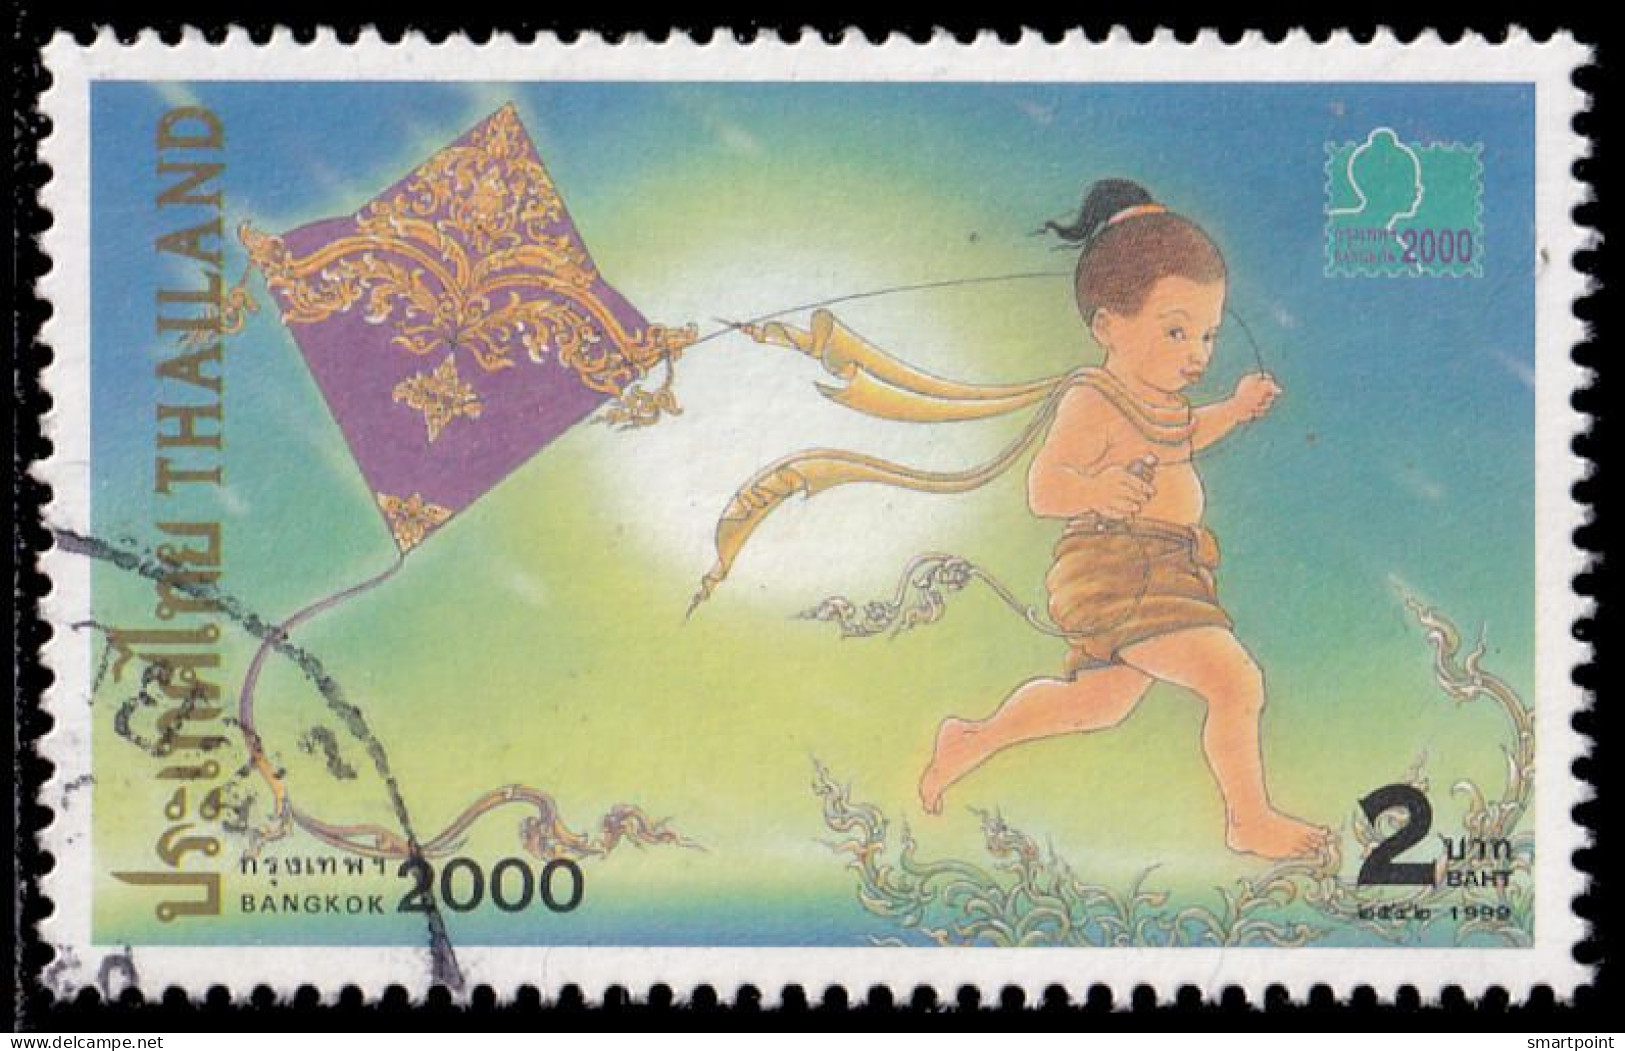 Thailand Stamp 1999 BANGKOK 2000 World Youth And 13th Asian International Stamp Exhibition (1st Series) 2 Baht - Used - Thailand